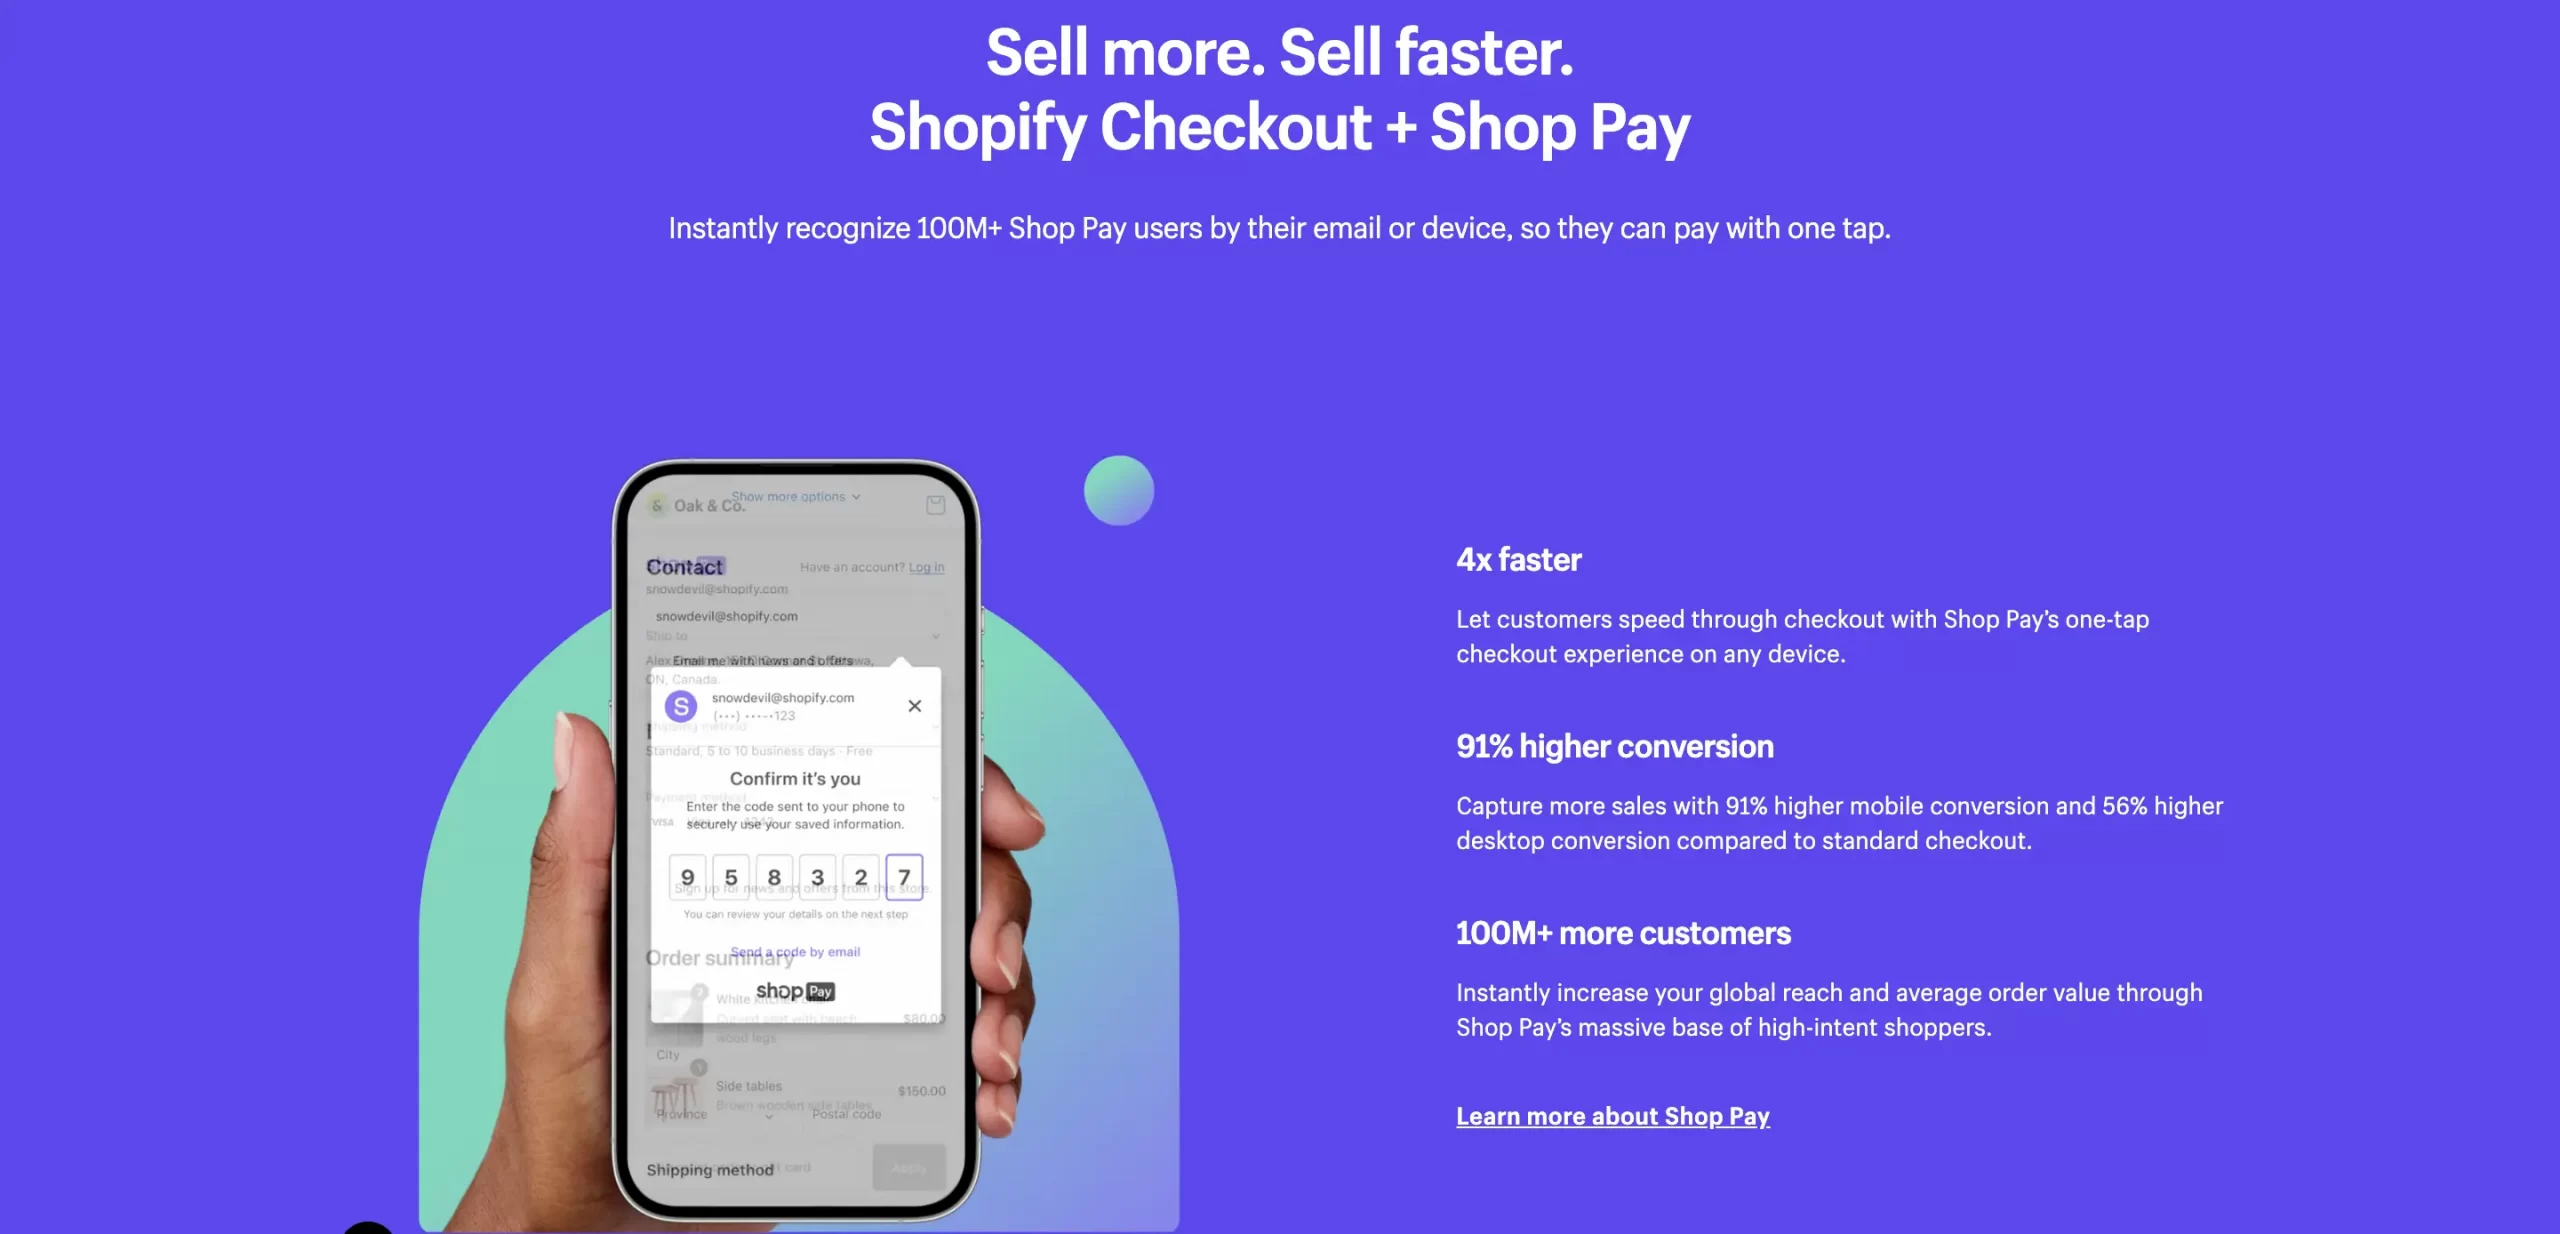 Shopify’s Shop Pay app allows customers to checkout in one-click.